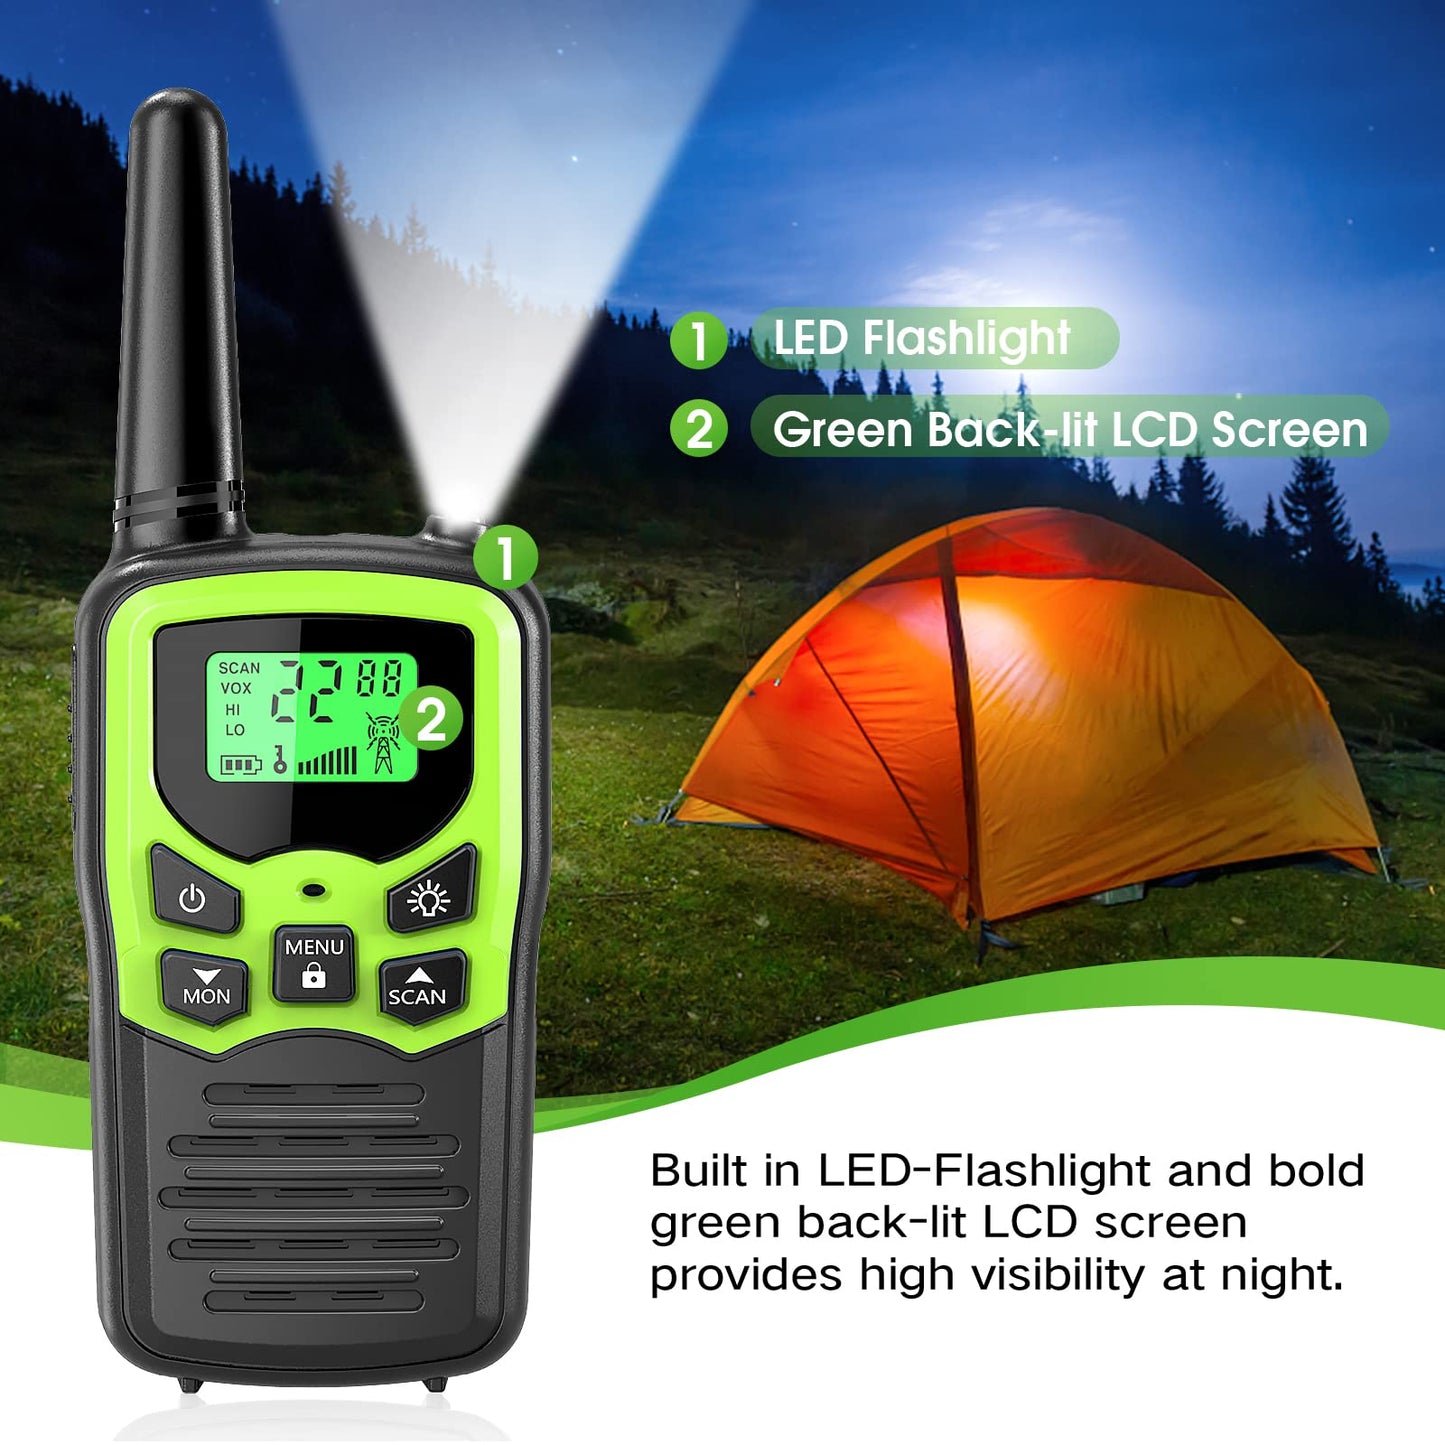 Walkie Talkies with 22 FRS Channels, MOICO Walkie Talkies for Adults with LED Flashlight VOX Scan LCD Display, Long Range Family Walkie Talkie Radios for Hiking Camping Trip (Green, 4 Pack)